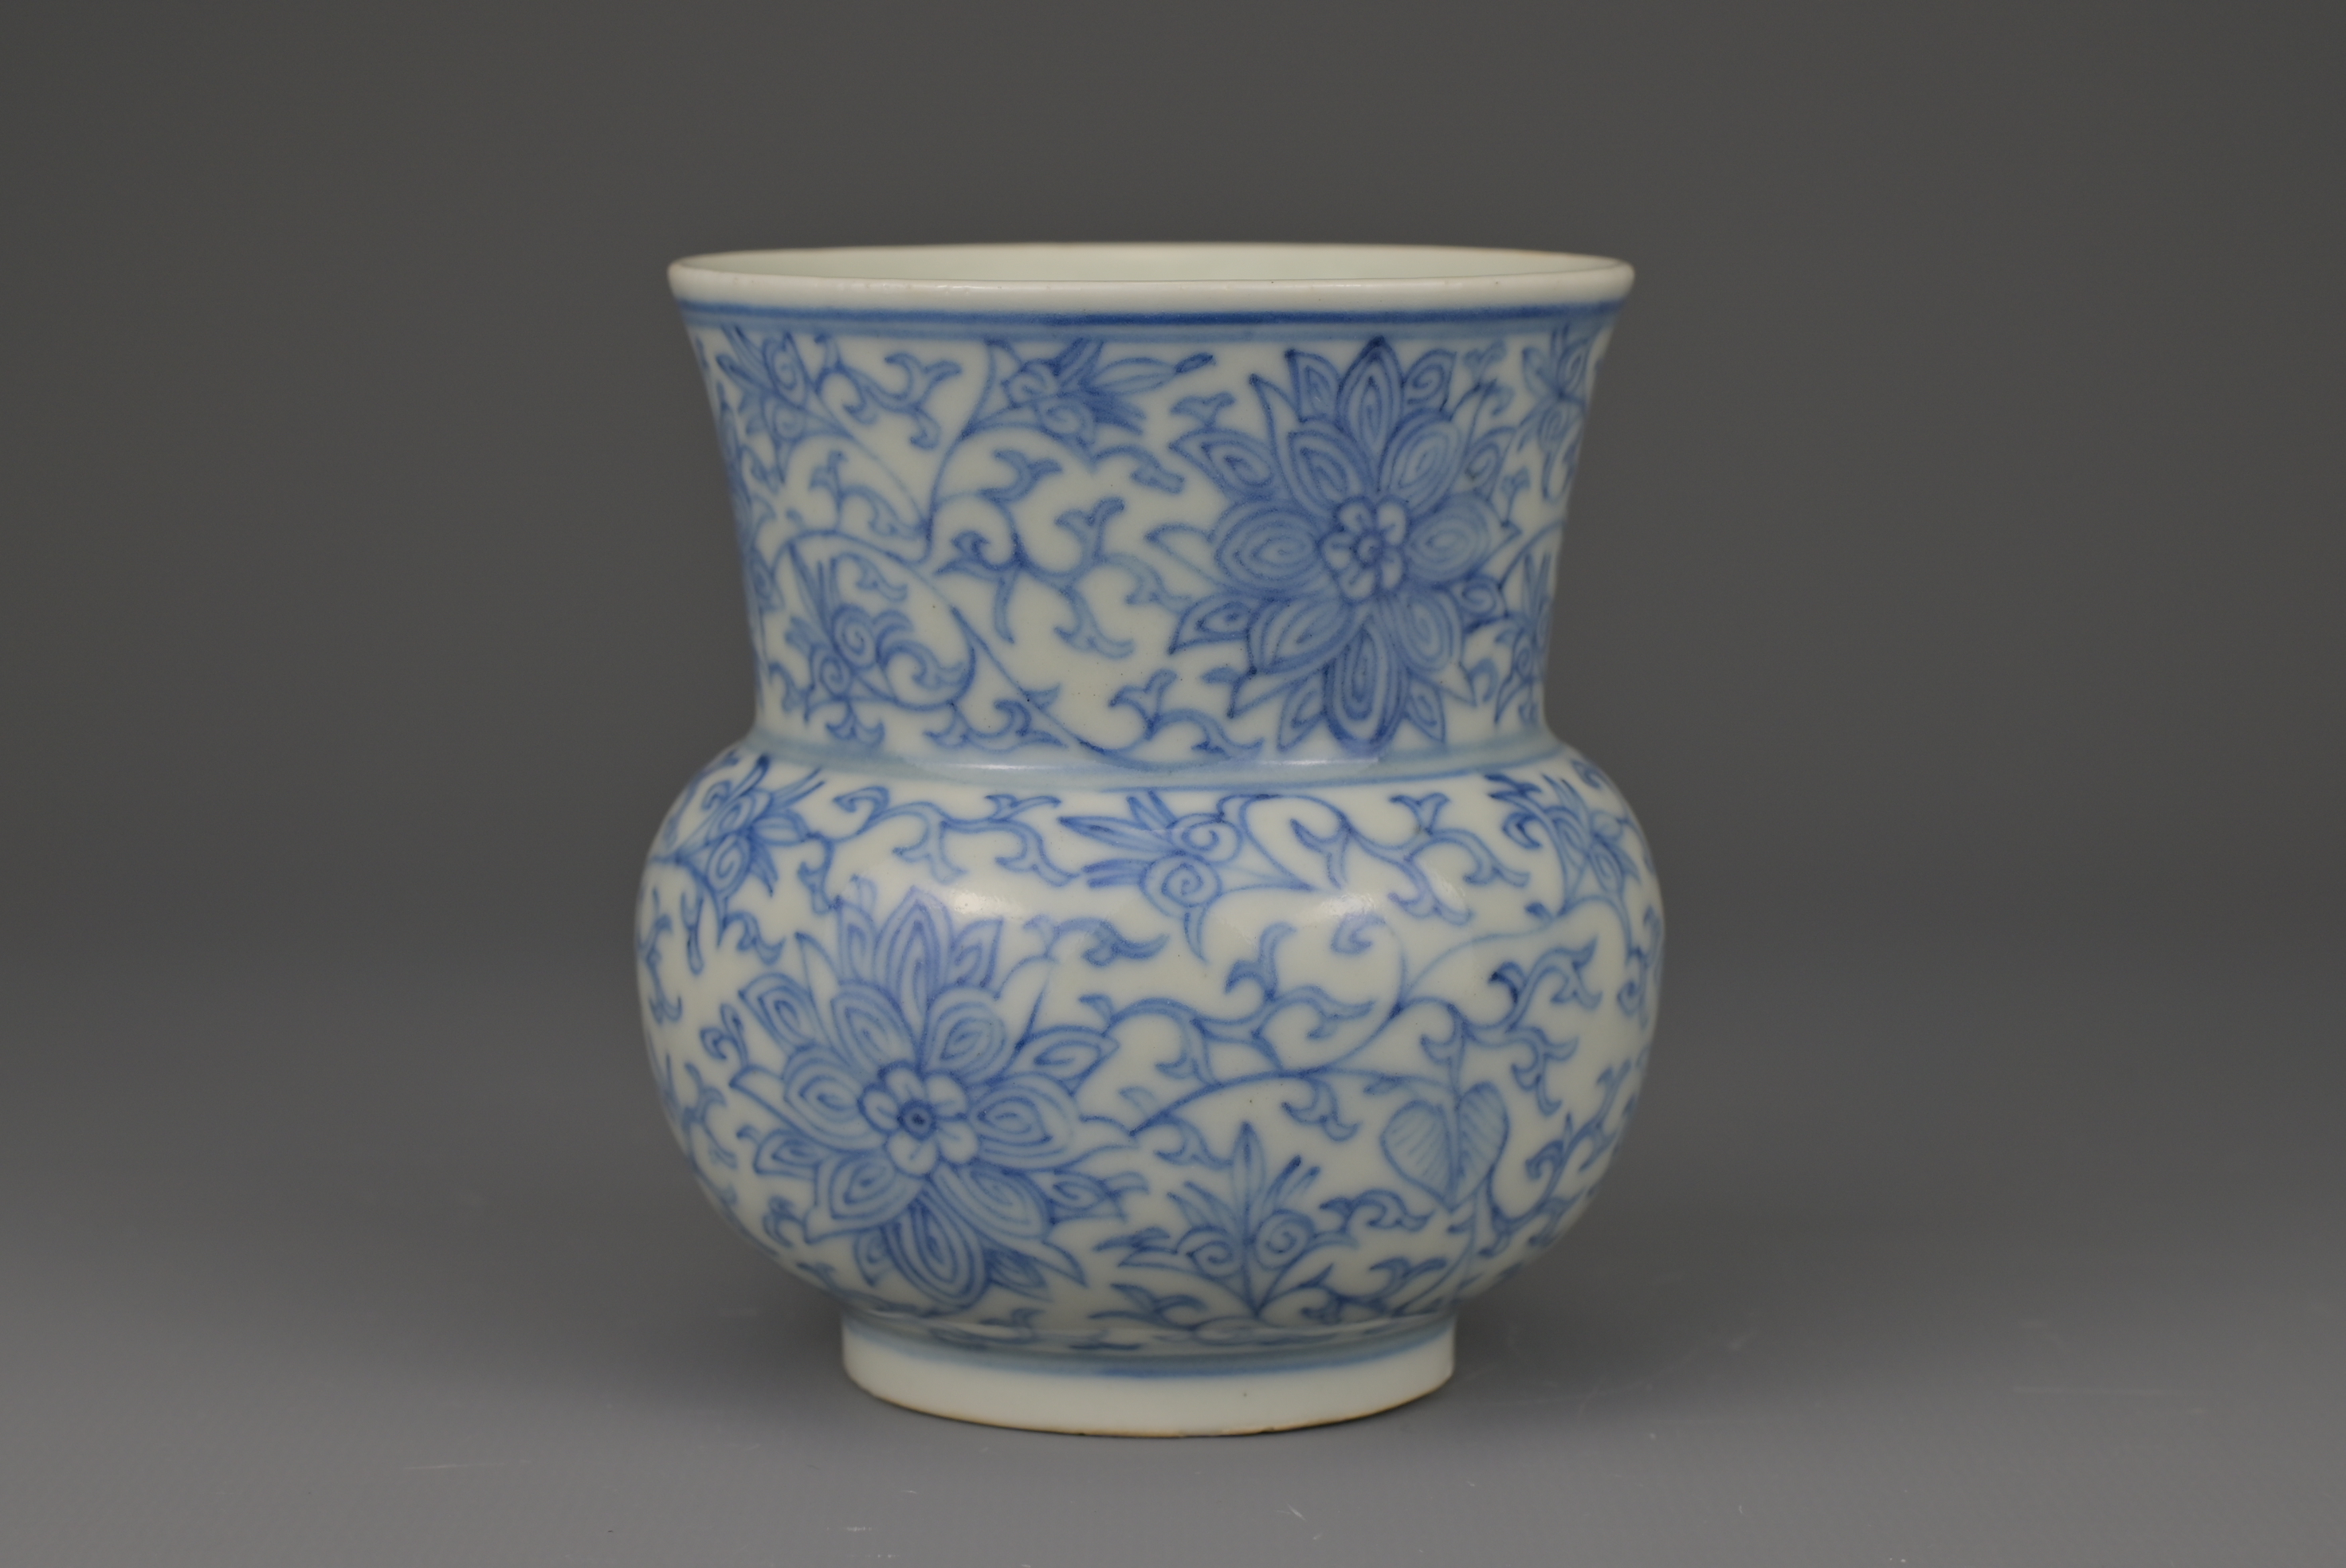 CHINESE BLUE AND WHITE PORCELAIN SPITTOON ‘ZHADOU’, JIAQING PERIOD, EARLY 19th CENTURY - Image 2 of 8